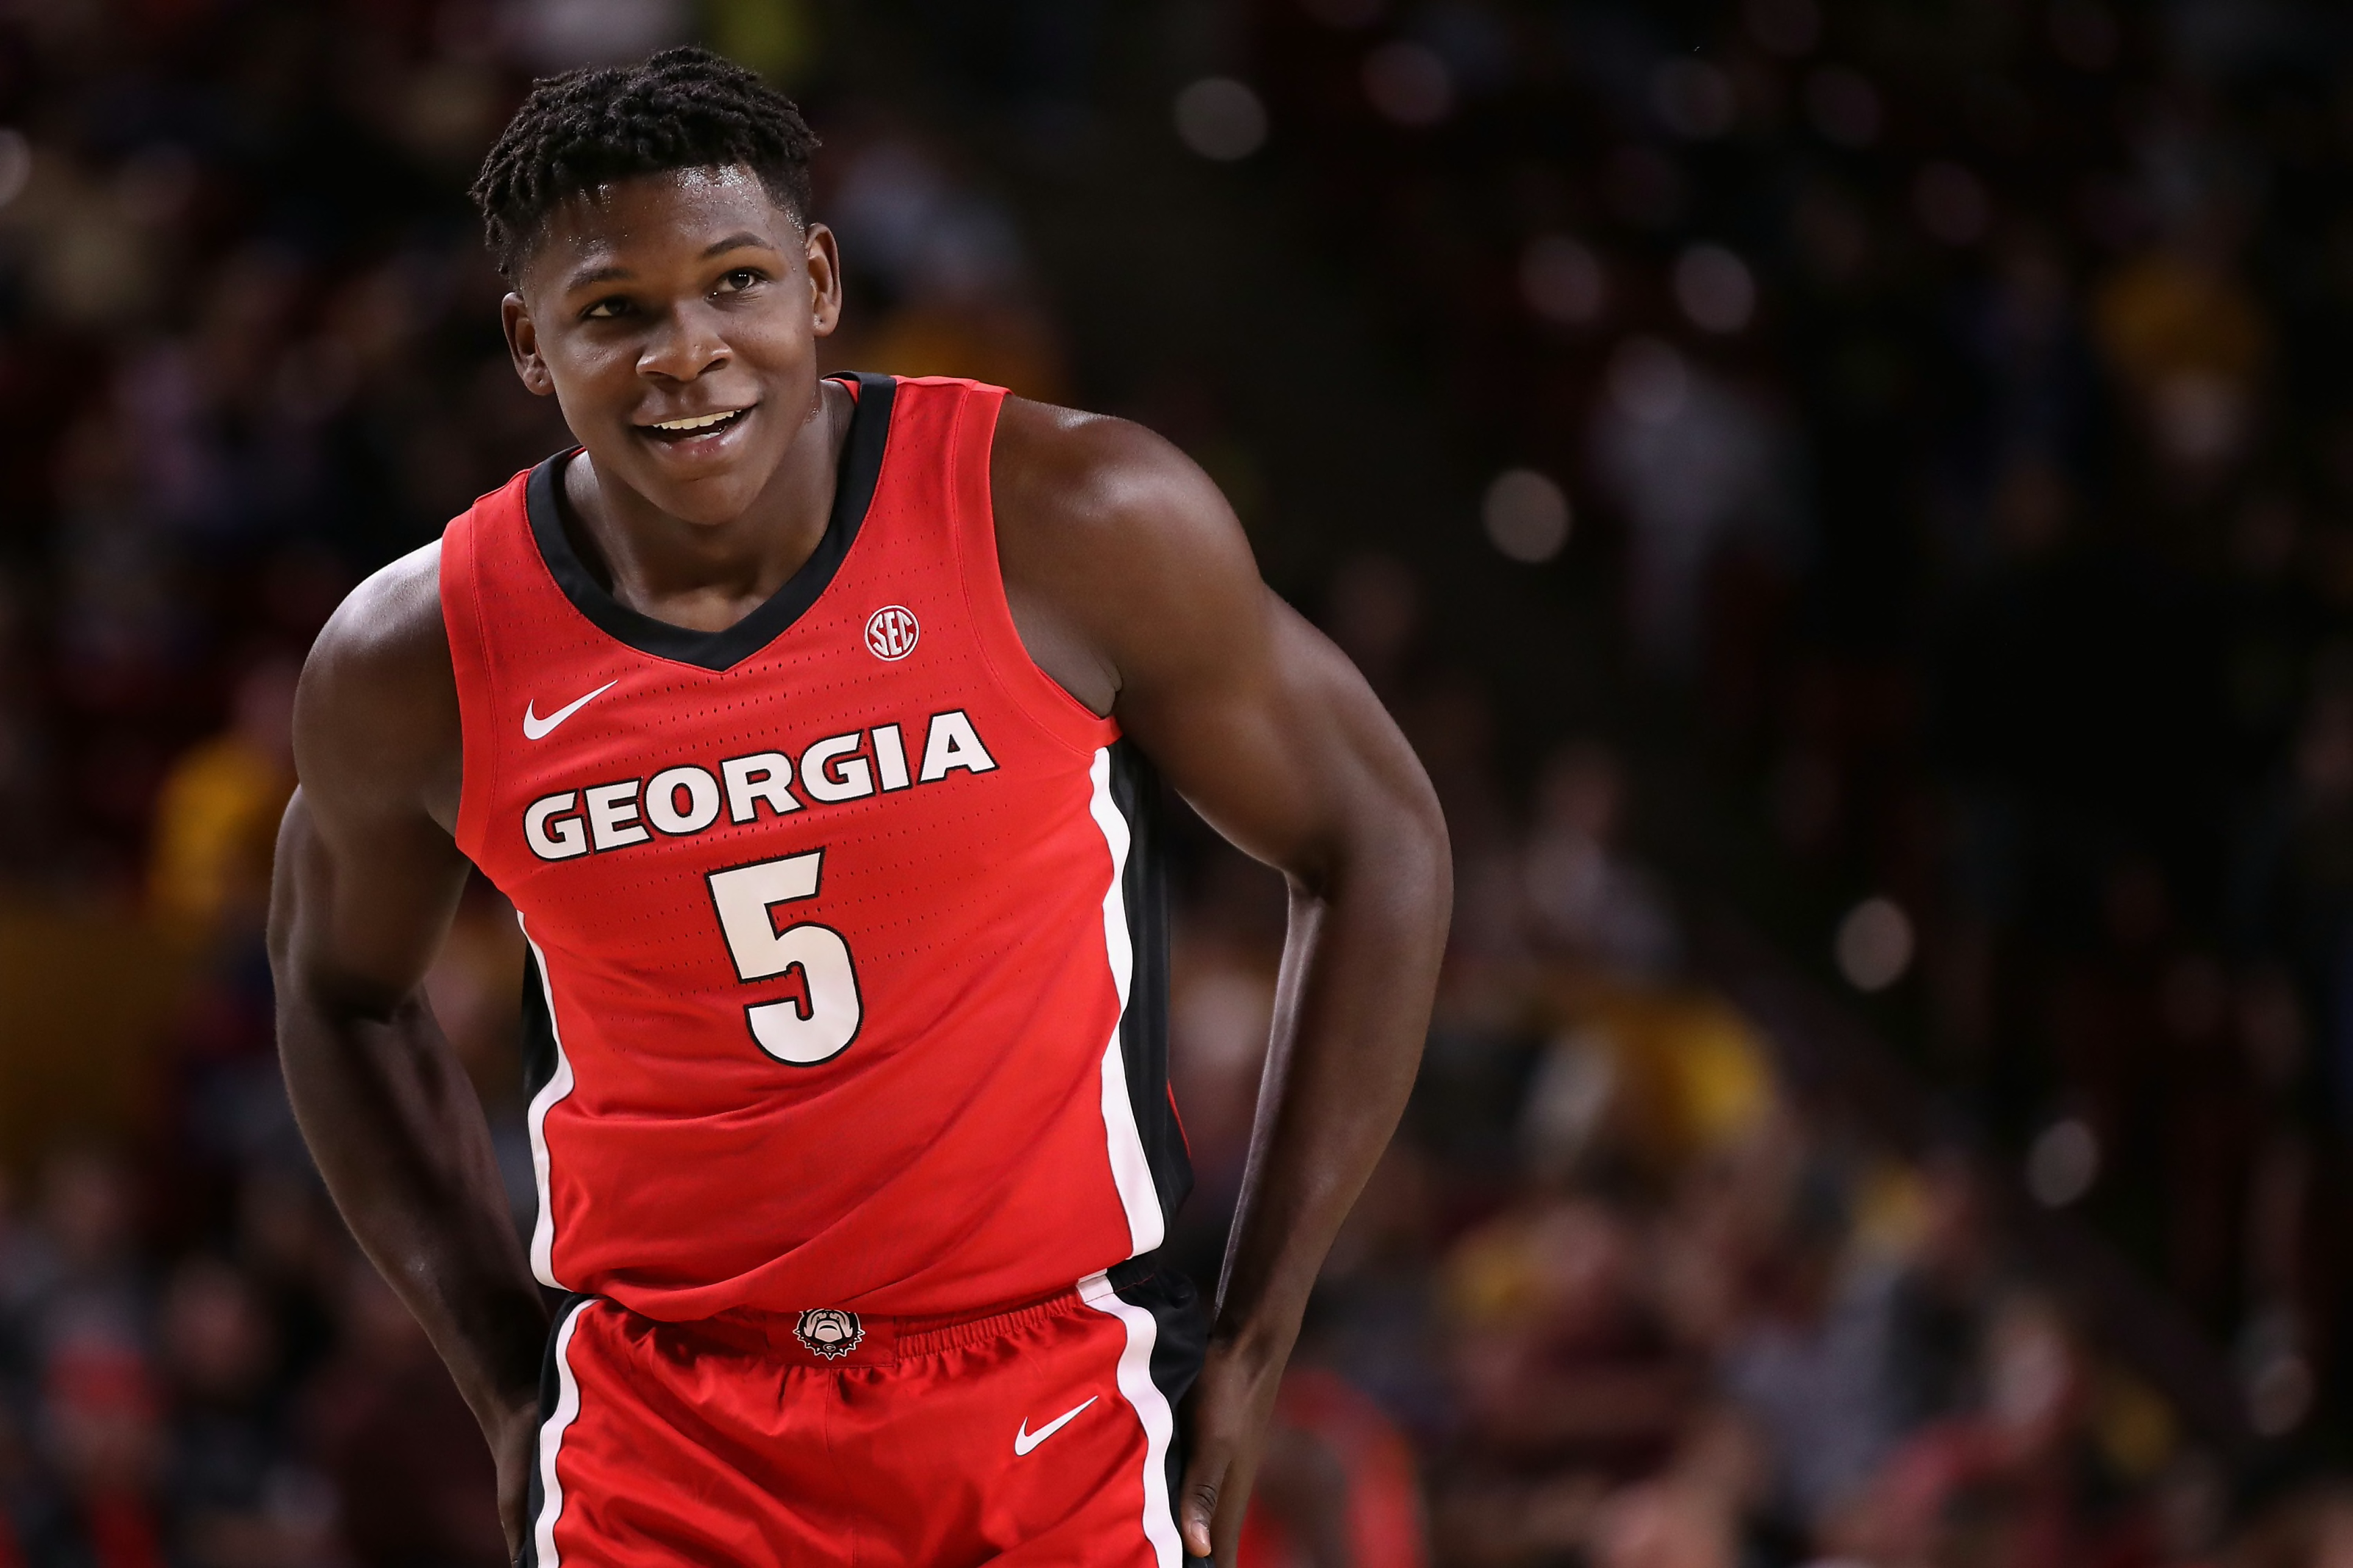 What drove Georgia's Anthony Edwards to become a potential No. 1